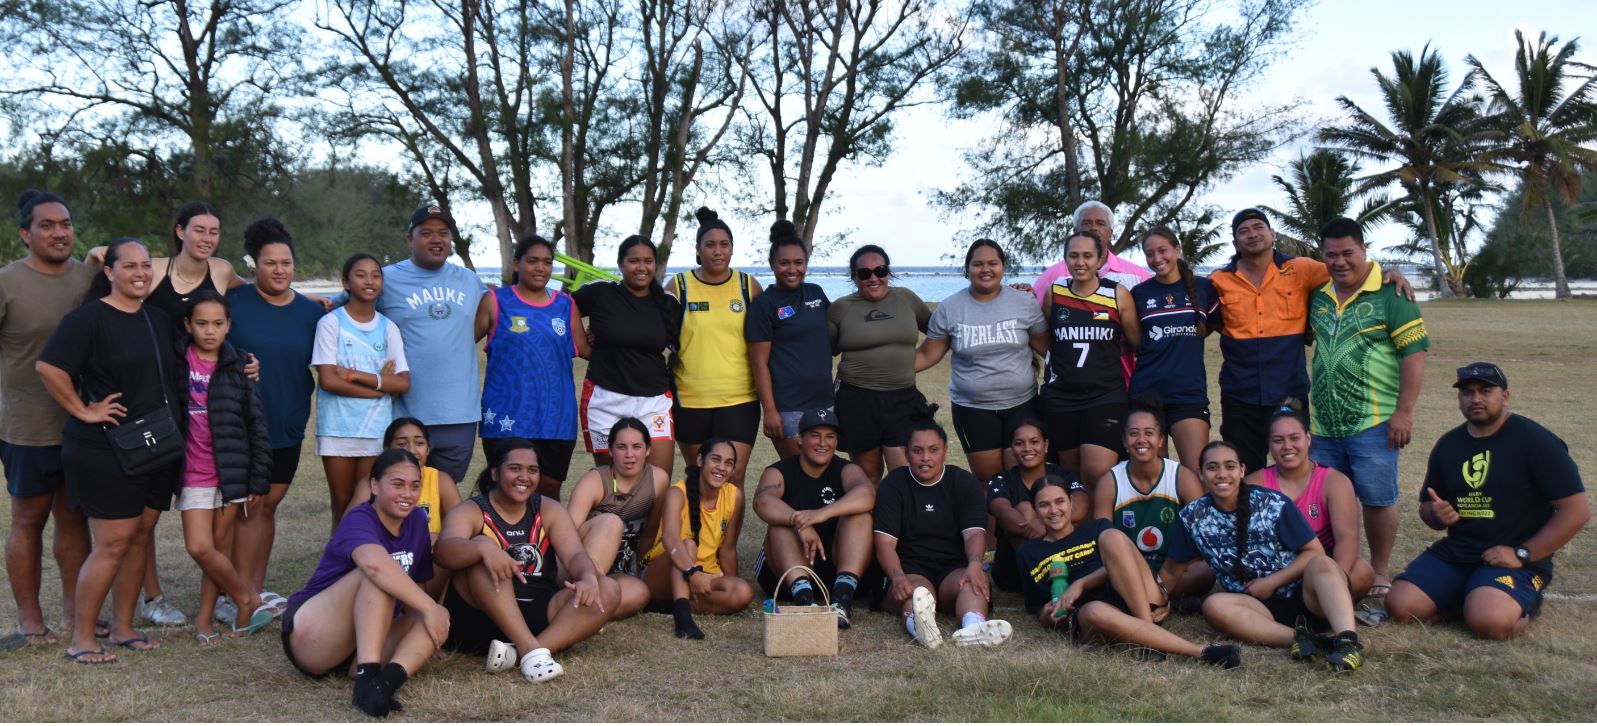 Women’s rugby gains momentum